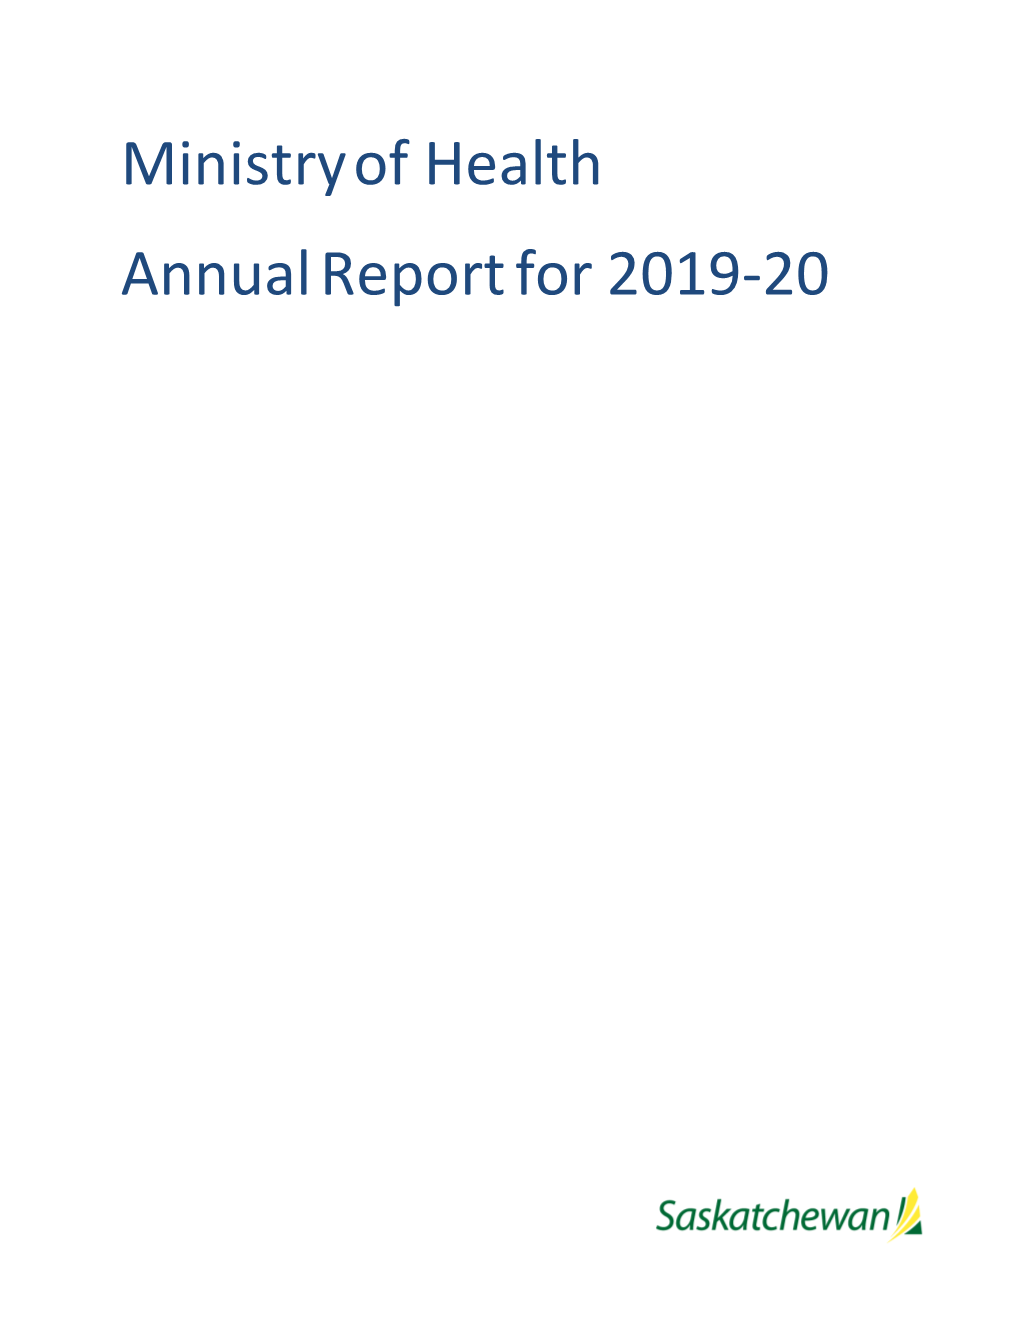 Ministry of Health Annual Report for 2019-20